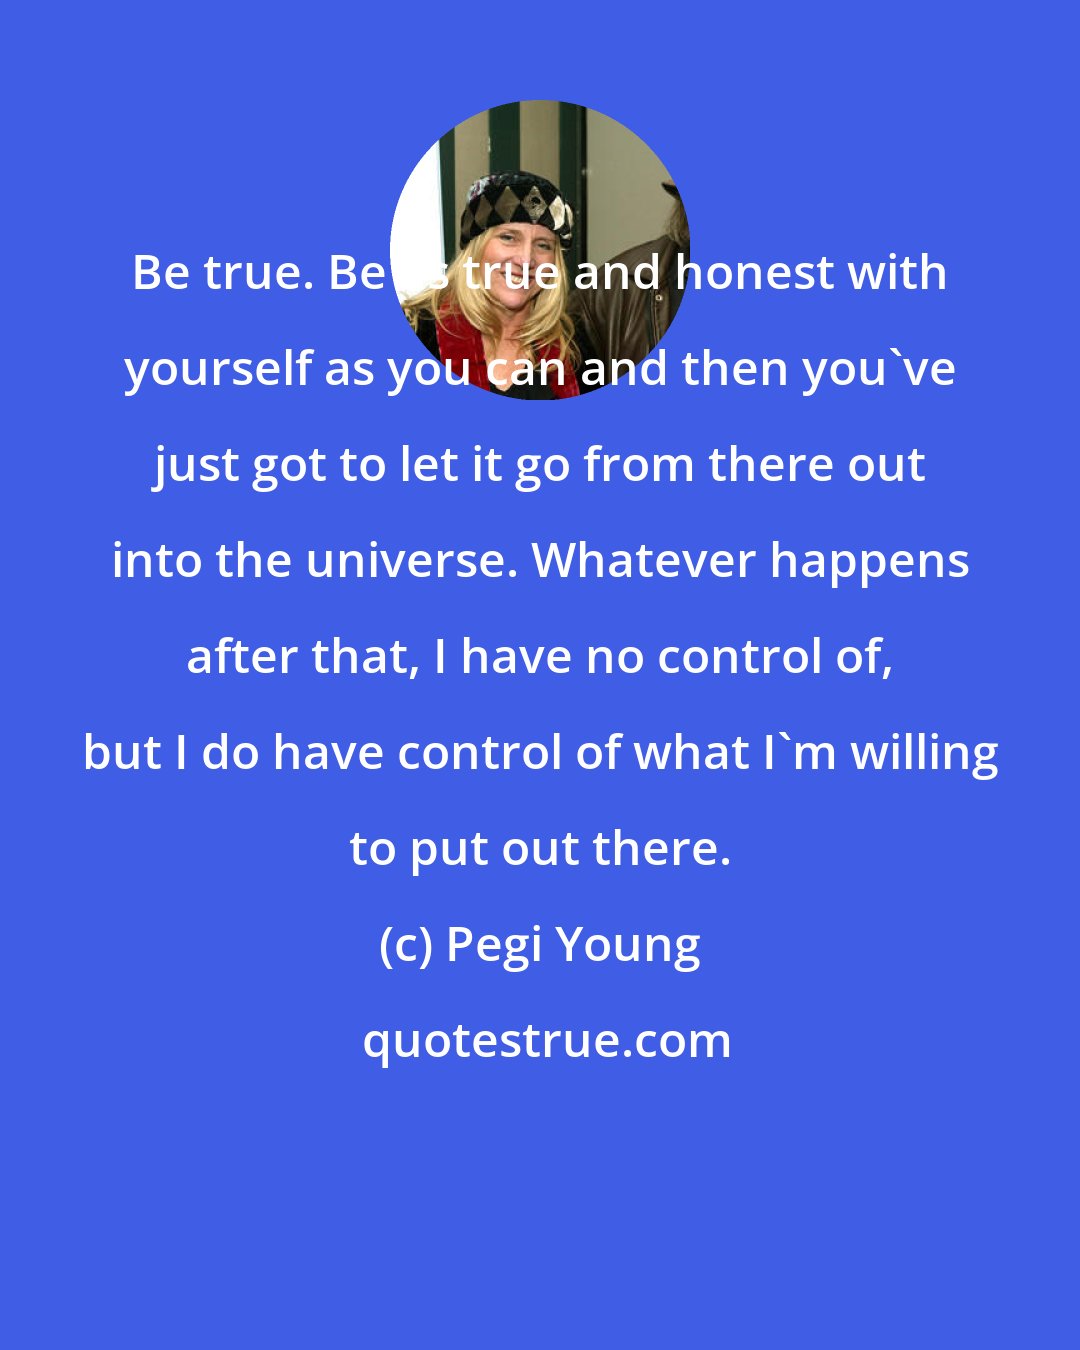 Pegi Young: Be true. Be as true and honest with yourself as you can and then you've just got to let it go from there out into the universe. Whatever happens after that, I have no control of, but I do have control of what I'm willing to put out there.